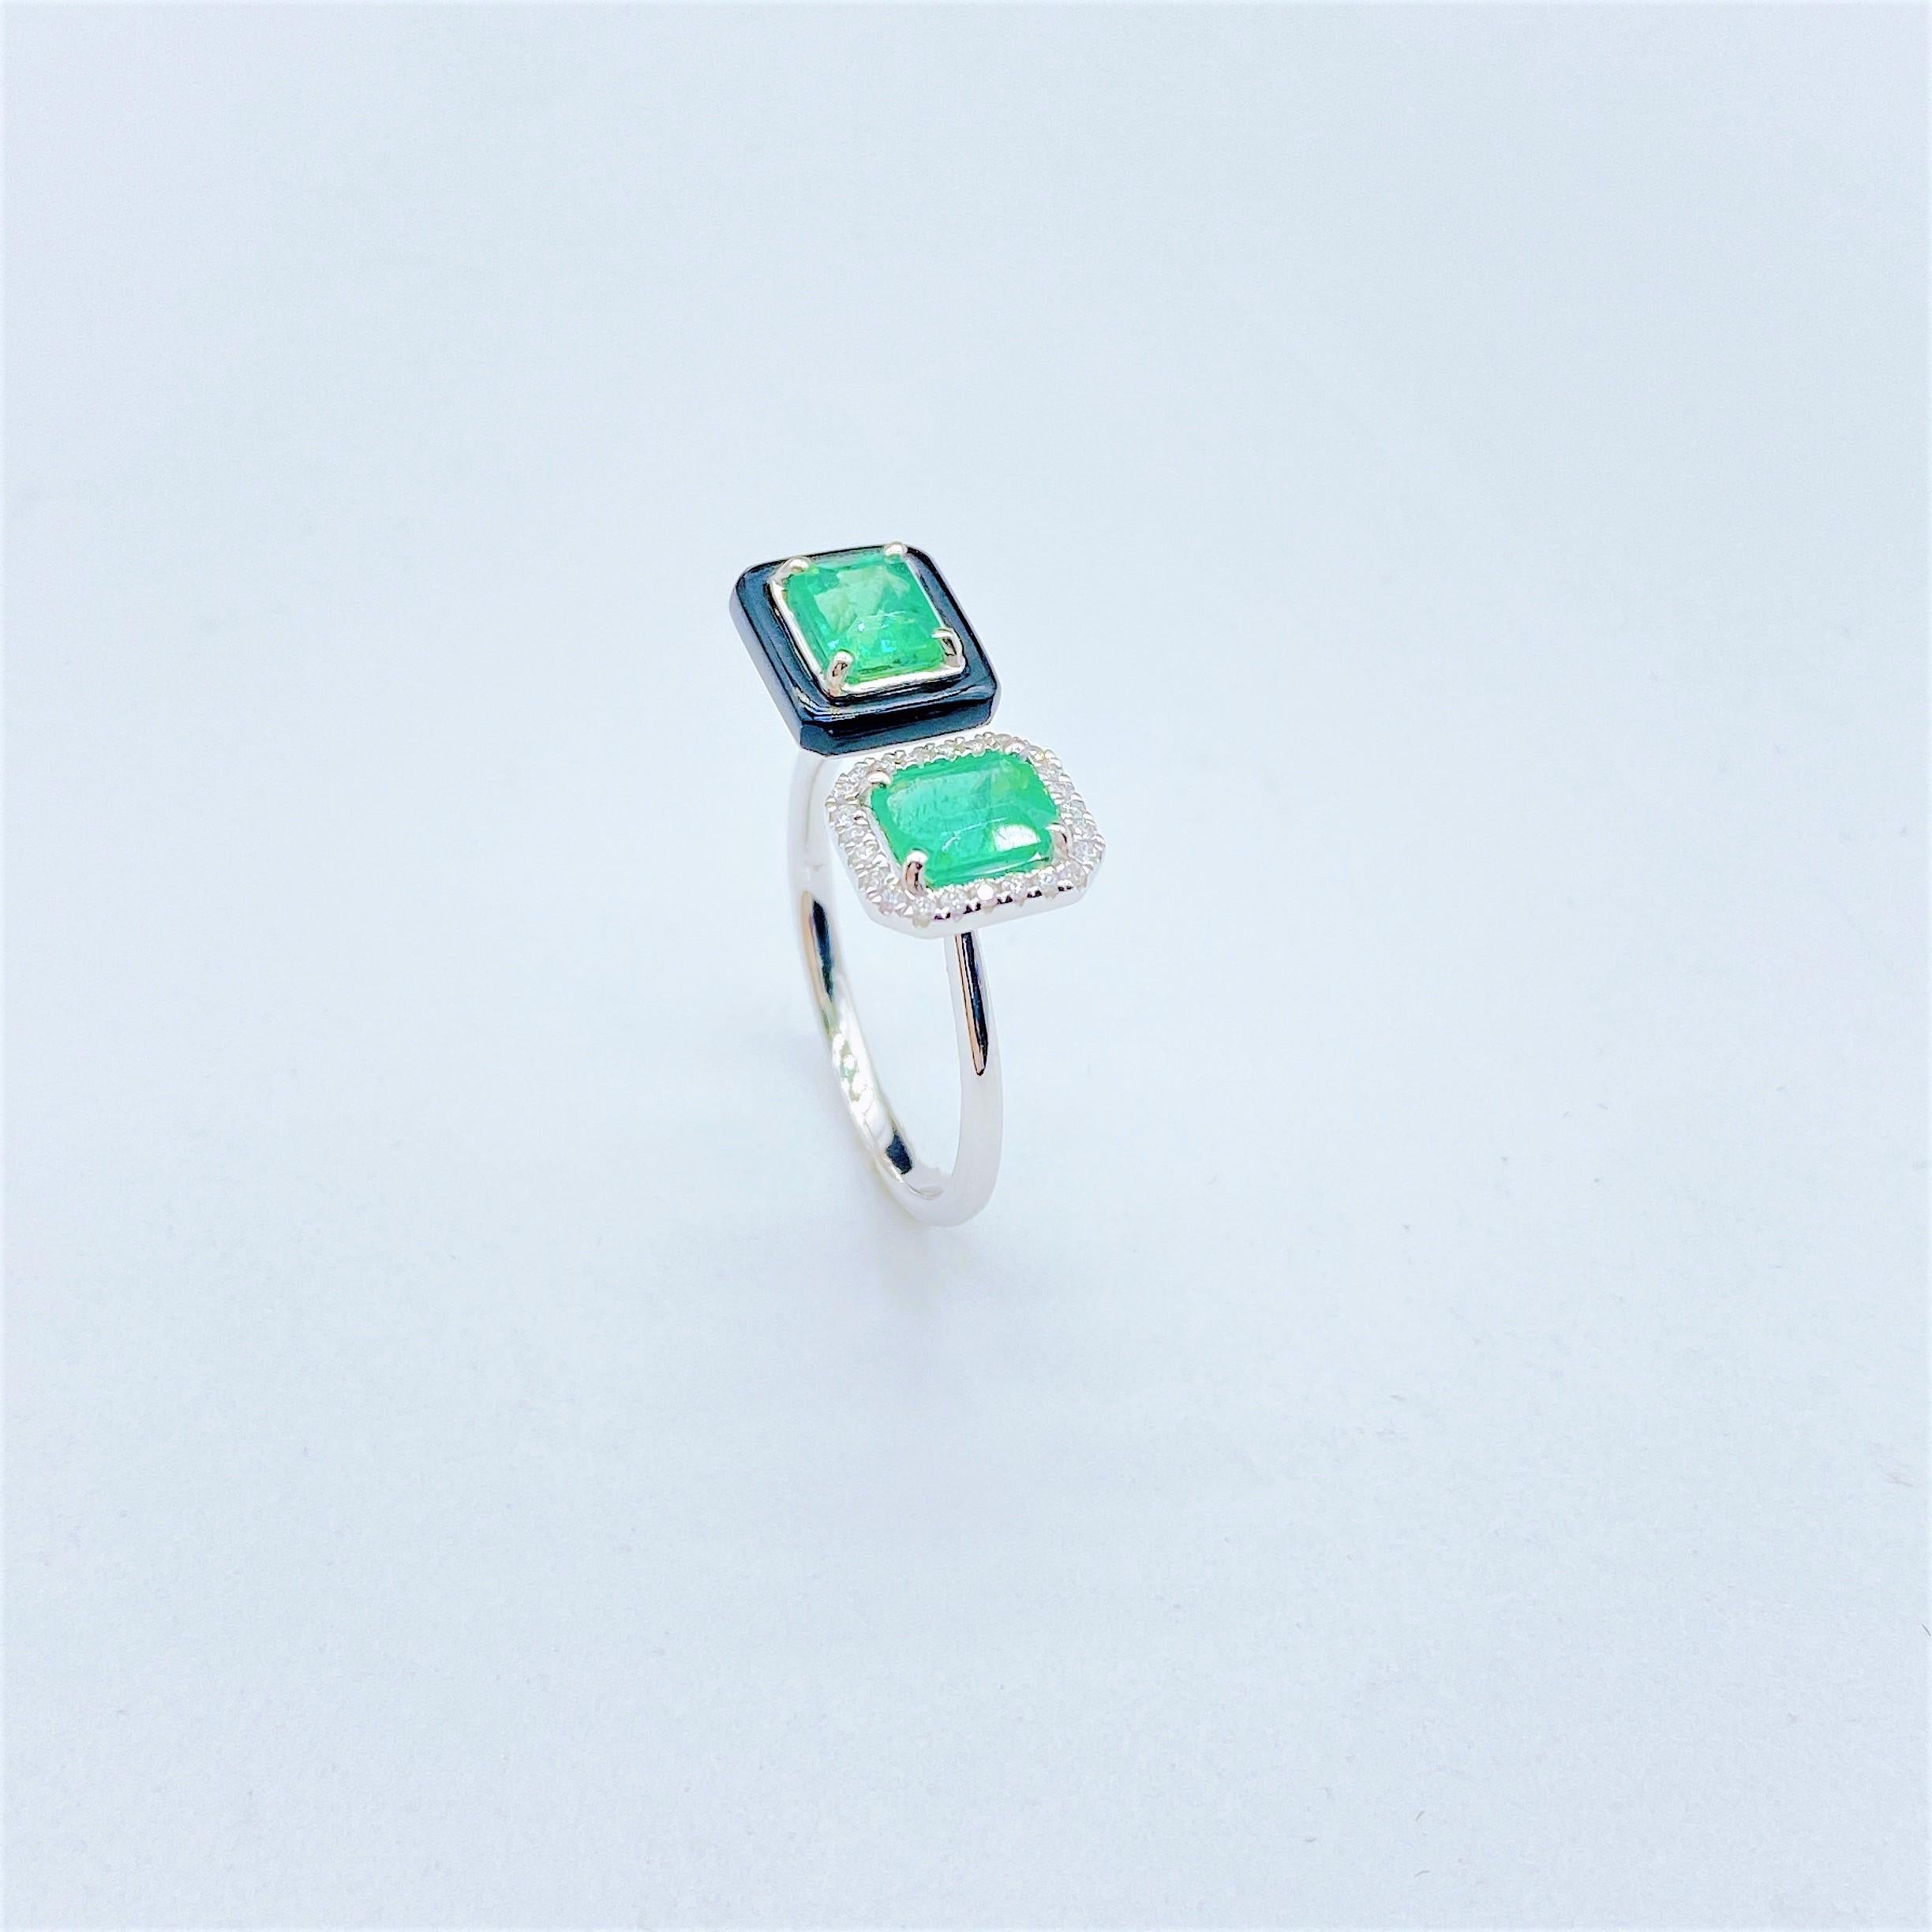 The Following Item we are offering is this Rare Important Radiant 18KT Gold Gorgeous Glittering and Sparkling Magnificent Fancy Emerald Cut Green Emerald and Onyx Diamond Ring. Ring Contains approx 2.50CTS of Beautiful Fancy Emerald Cut Emeralds,